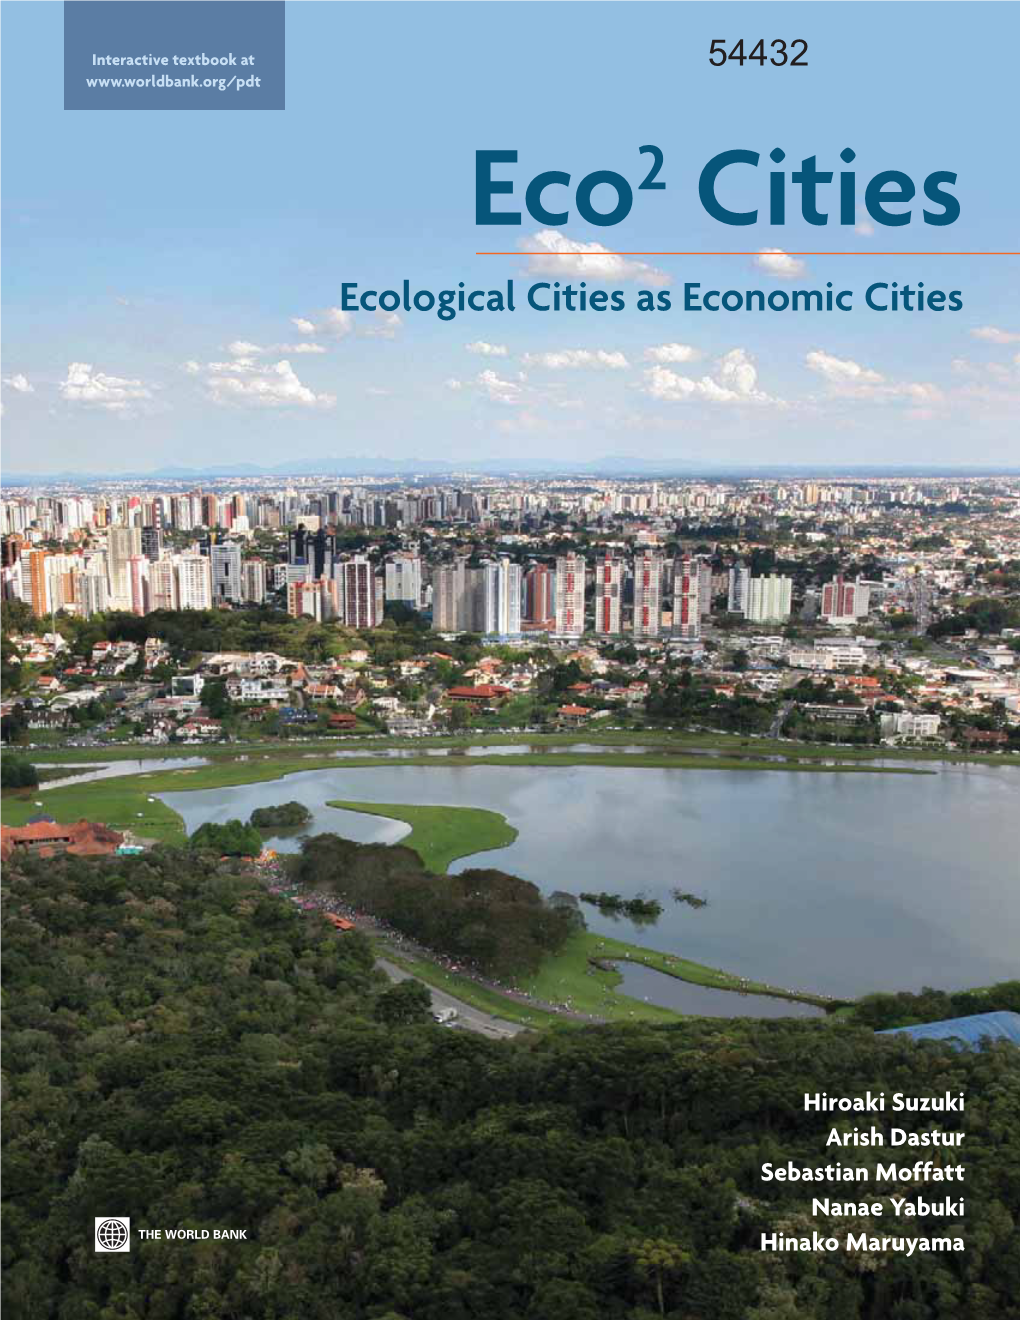 ECO2 CITIES: ECOLOGICAL CITIES AS ECONOMIC CITIES Lenges in Trying to Adopt New Approaches